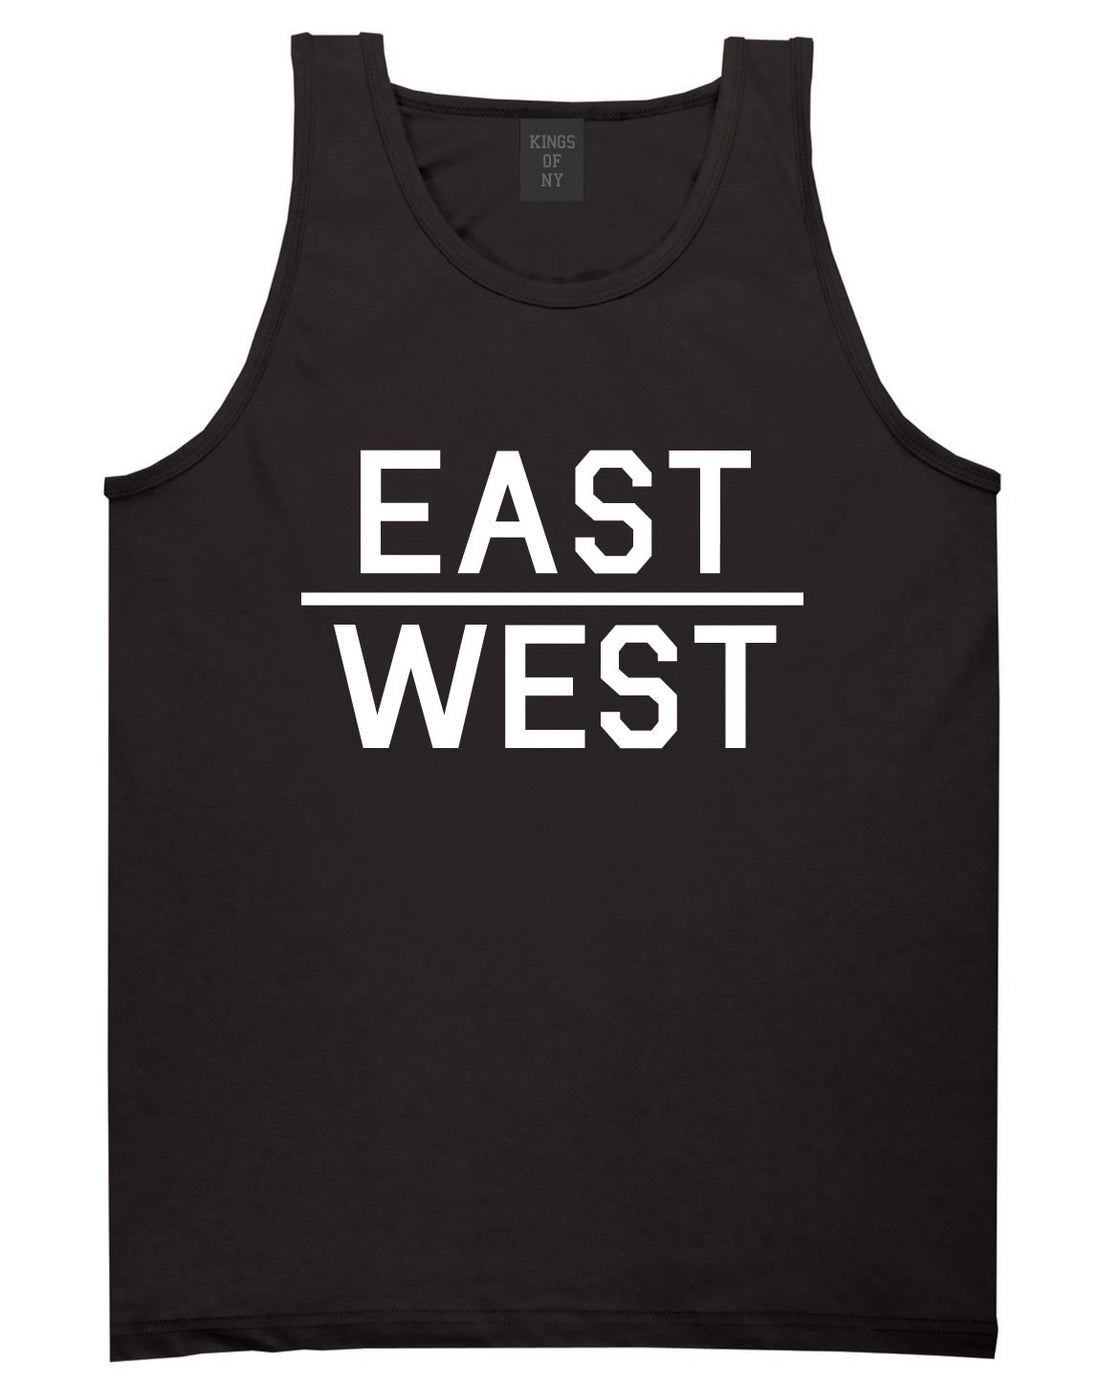 East West Tank Top in Black by Kings Of NY